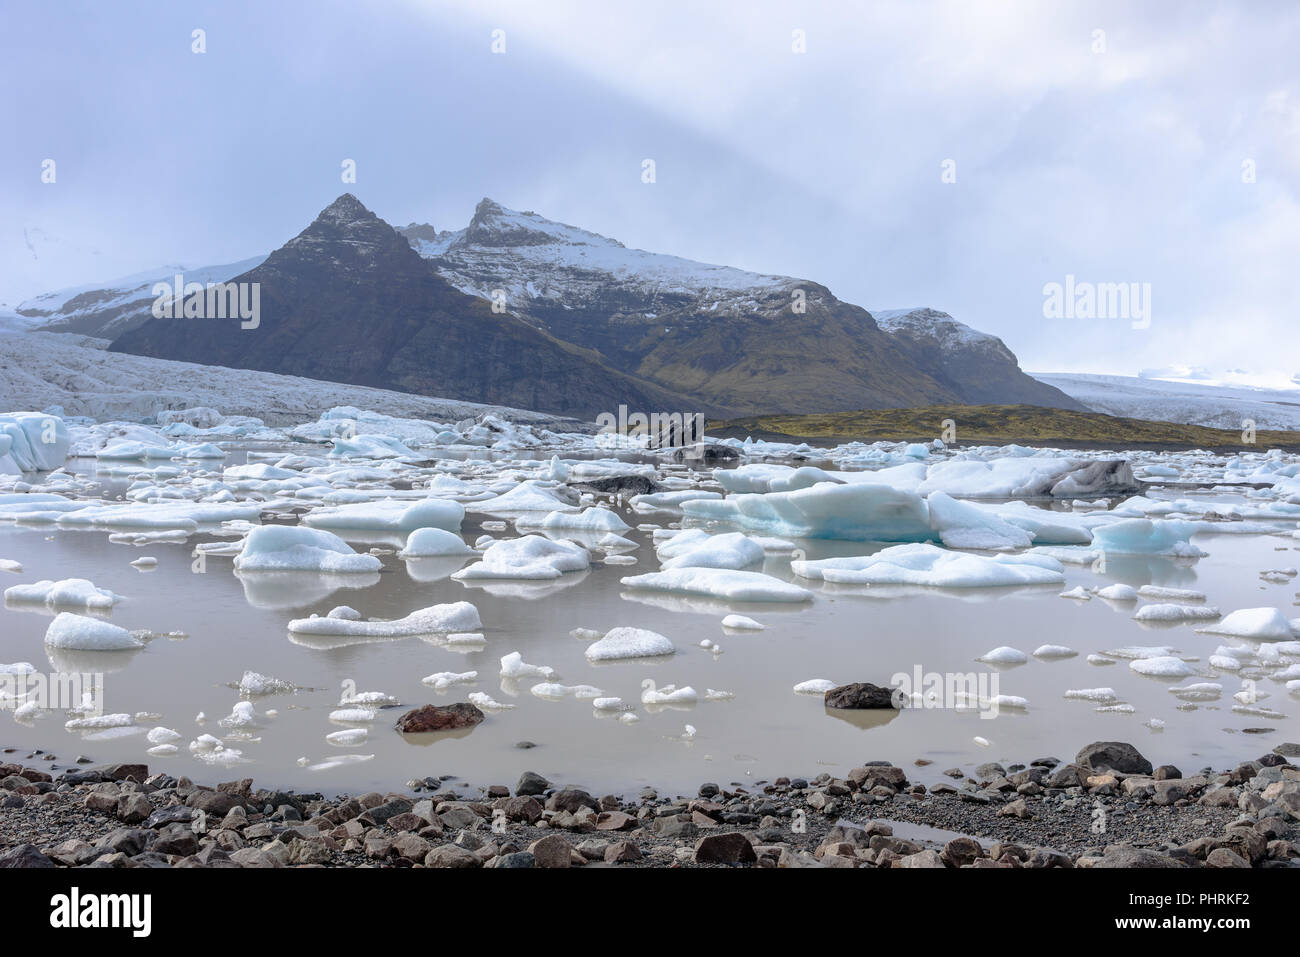 Icebergs in the Fjallsárlón glacial lake in Iceland on a day with clouds Stock Photo